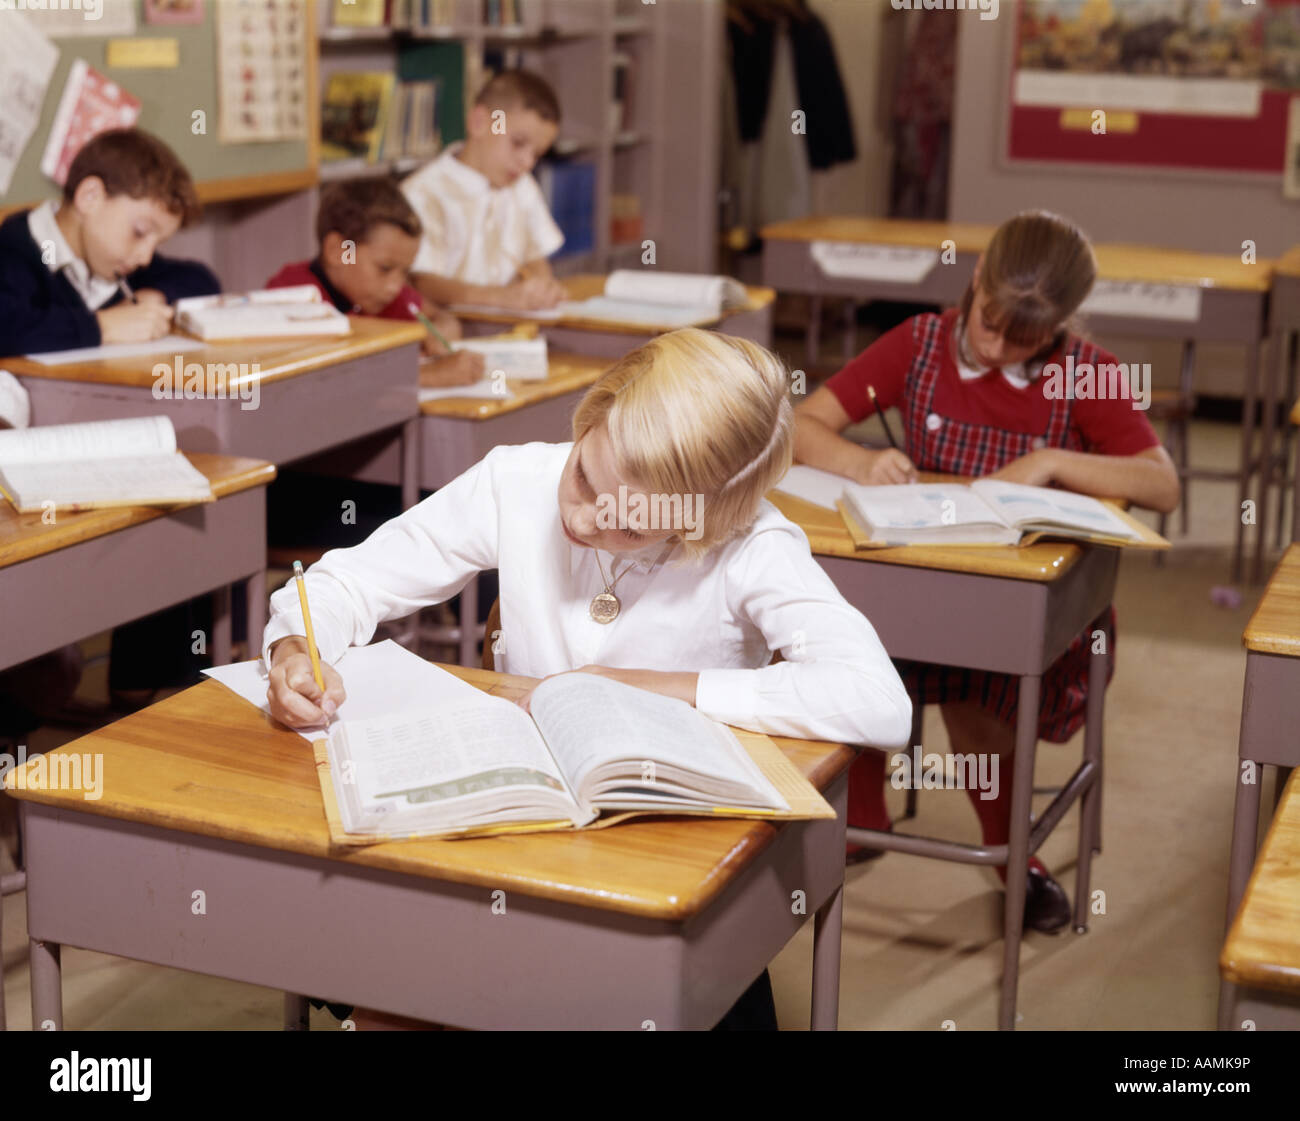 1960s ELEMENTARY SCHOOL CHILDREN IN CLASSROM AT DESKS WORKING WITH BOOKS AND PAPERS BOY GIRL Stock Photo